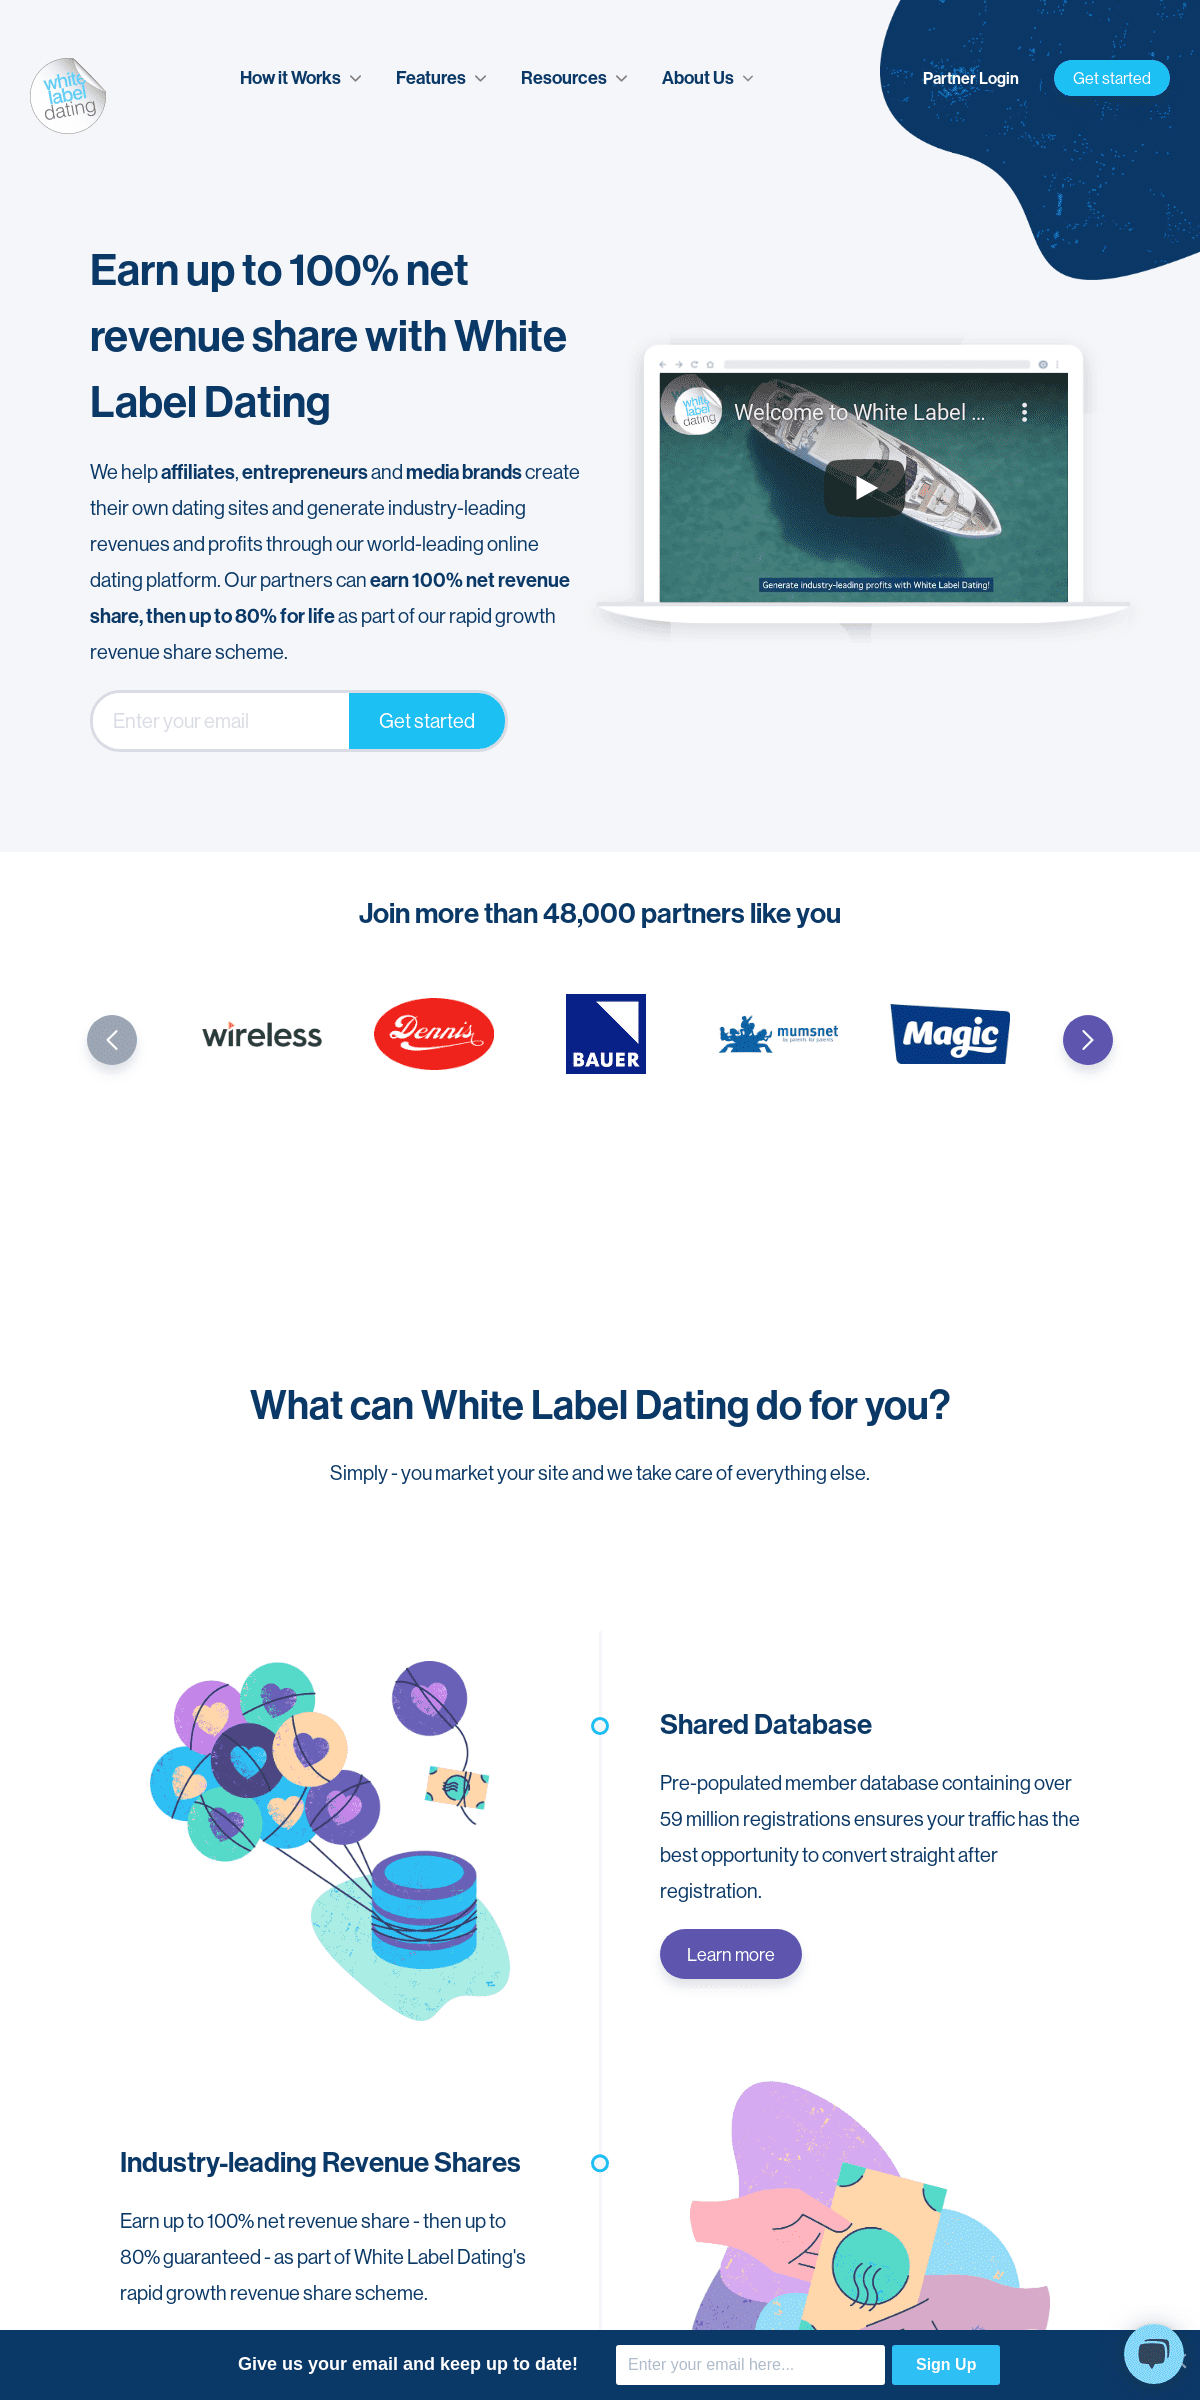 A complete backup of whitelabeldating.com